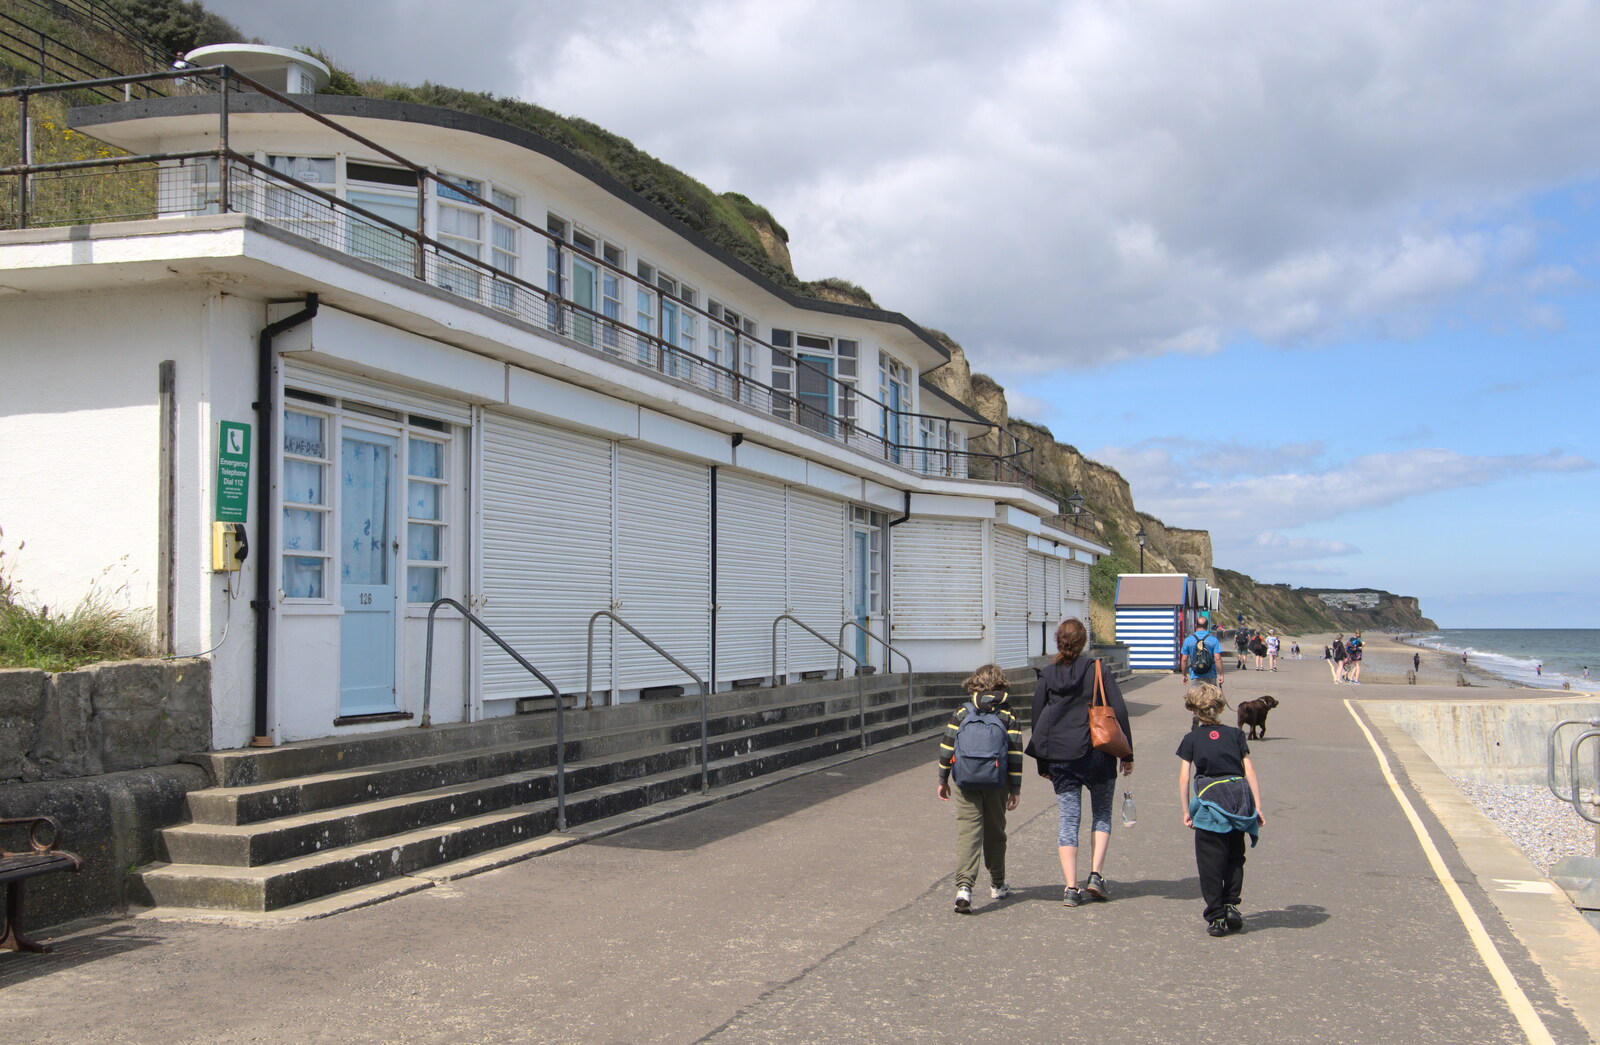 A 1930s beach-front building from Camping on the Coast, East Runton, North Norfolk - 25th July 2020